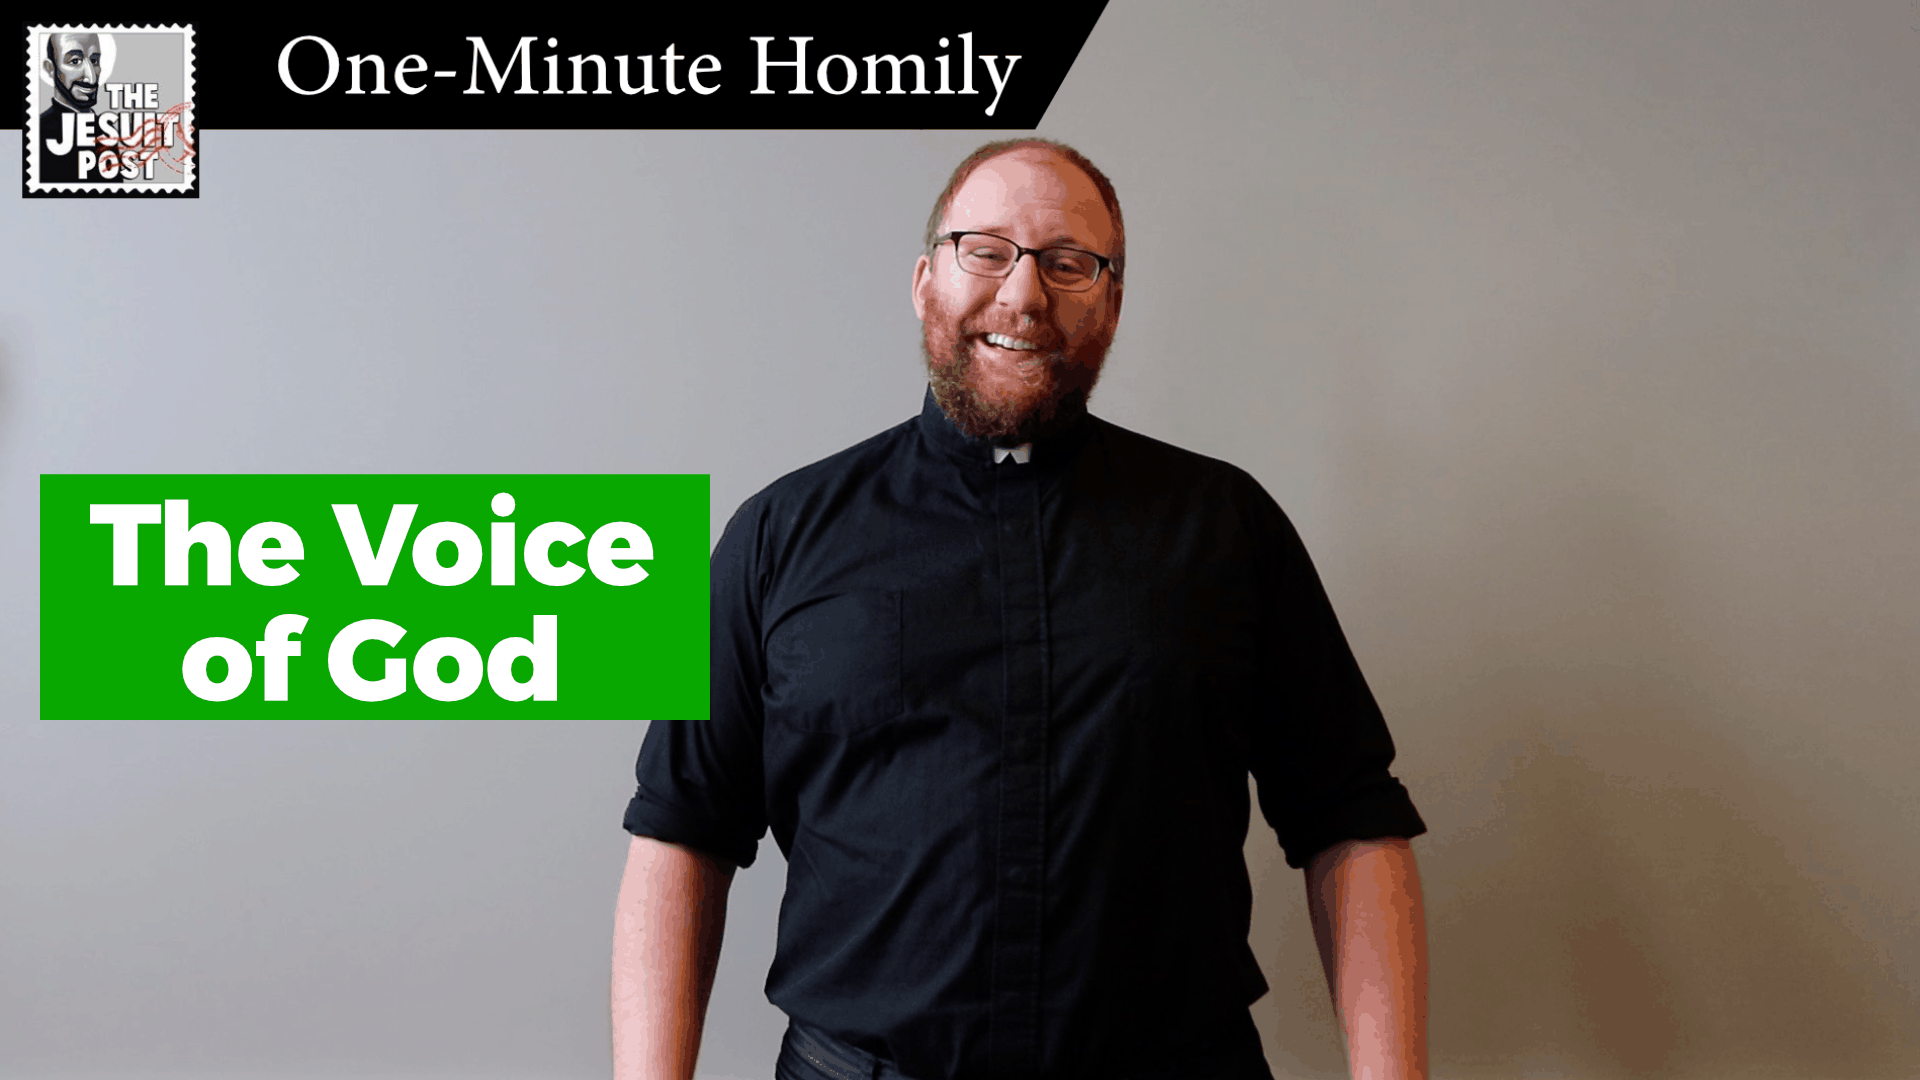 One-Minute Homily: “The Voice of God”